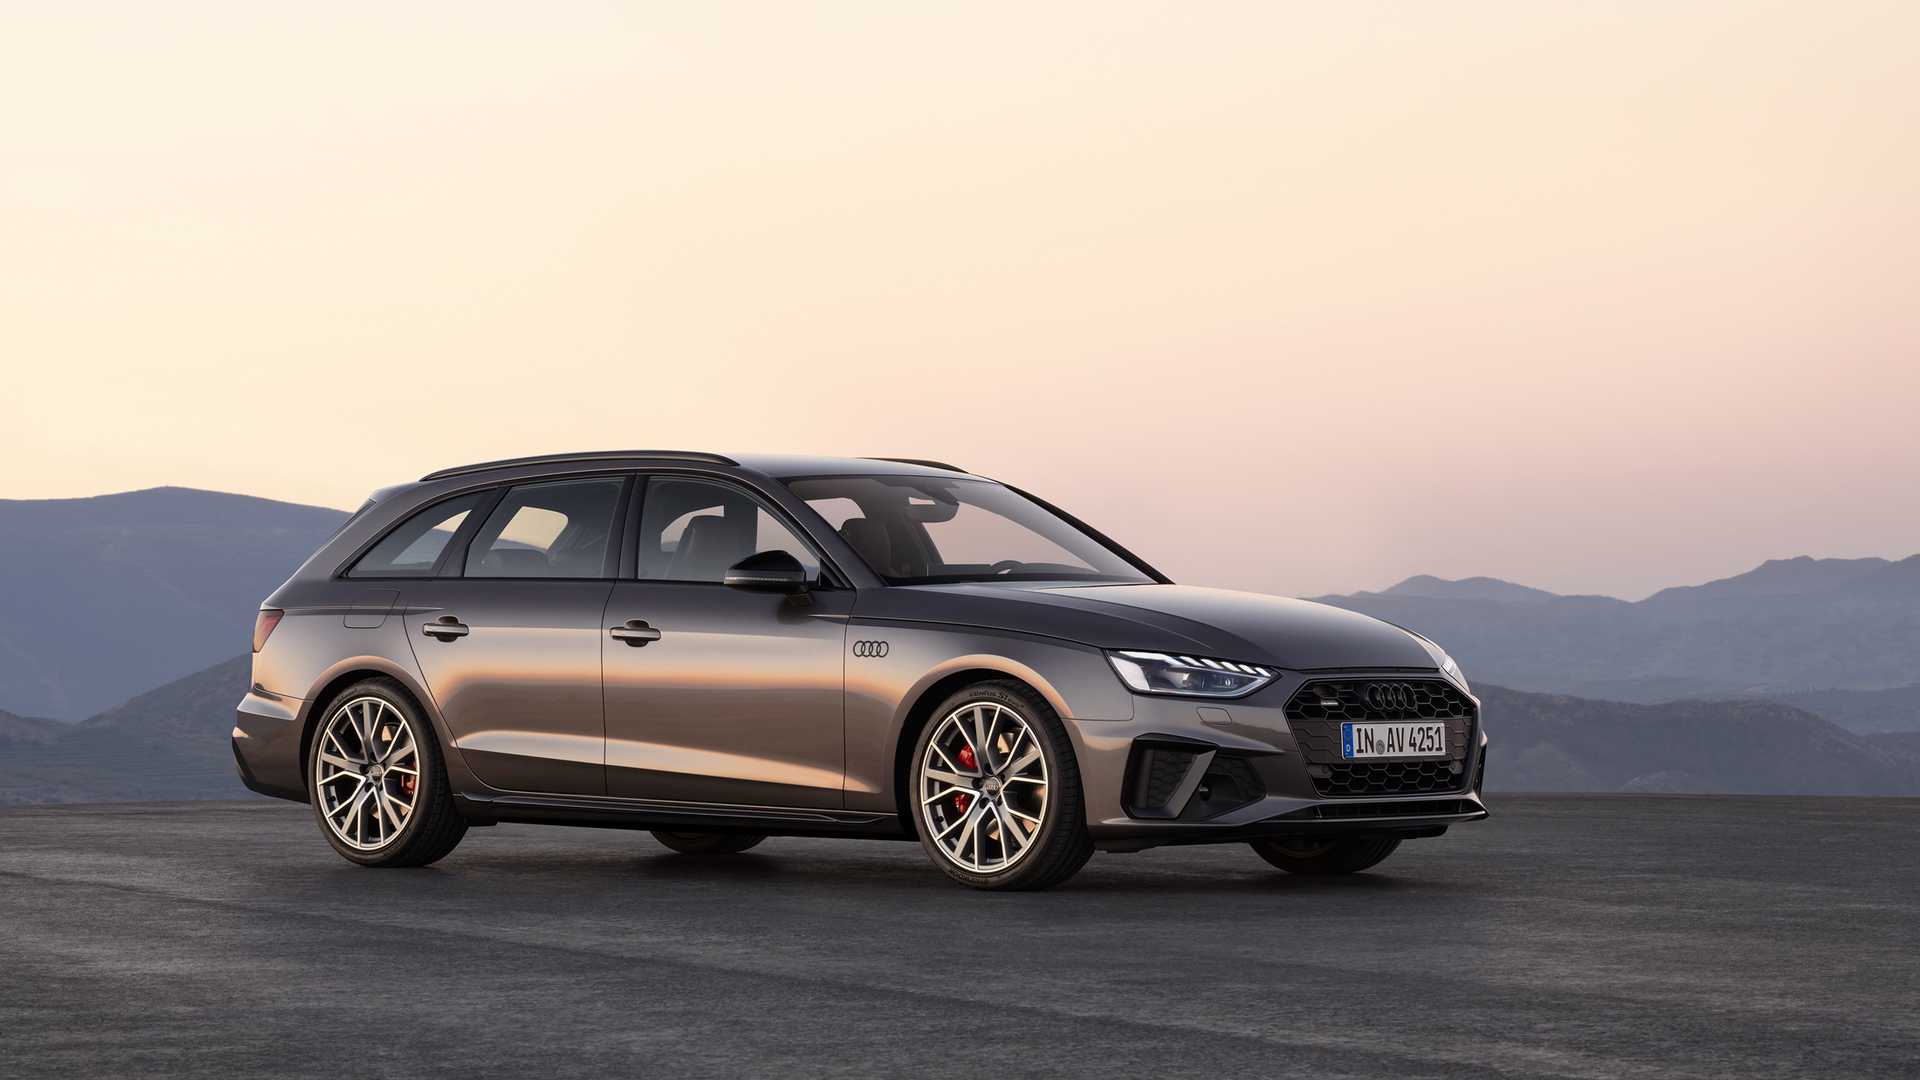 Namens gras Verdachte 2020 Audi A4 Review, Ratings, Specs, Prices, and Photos - The Car Connection